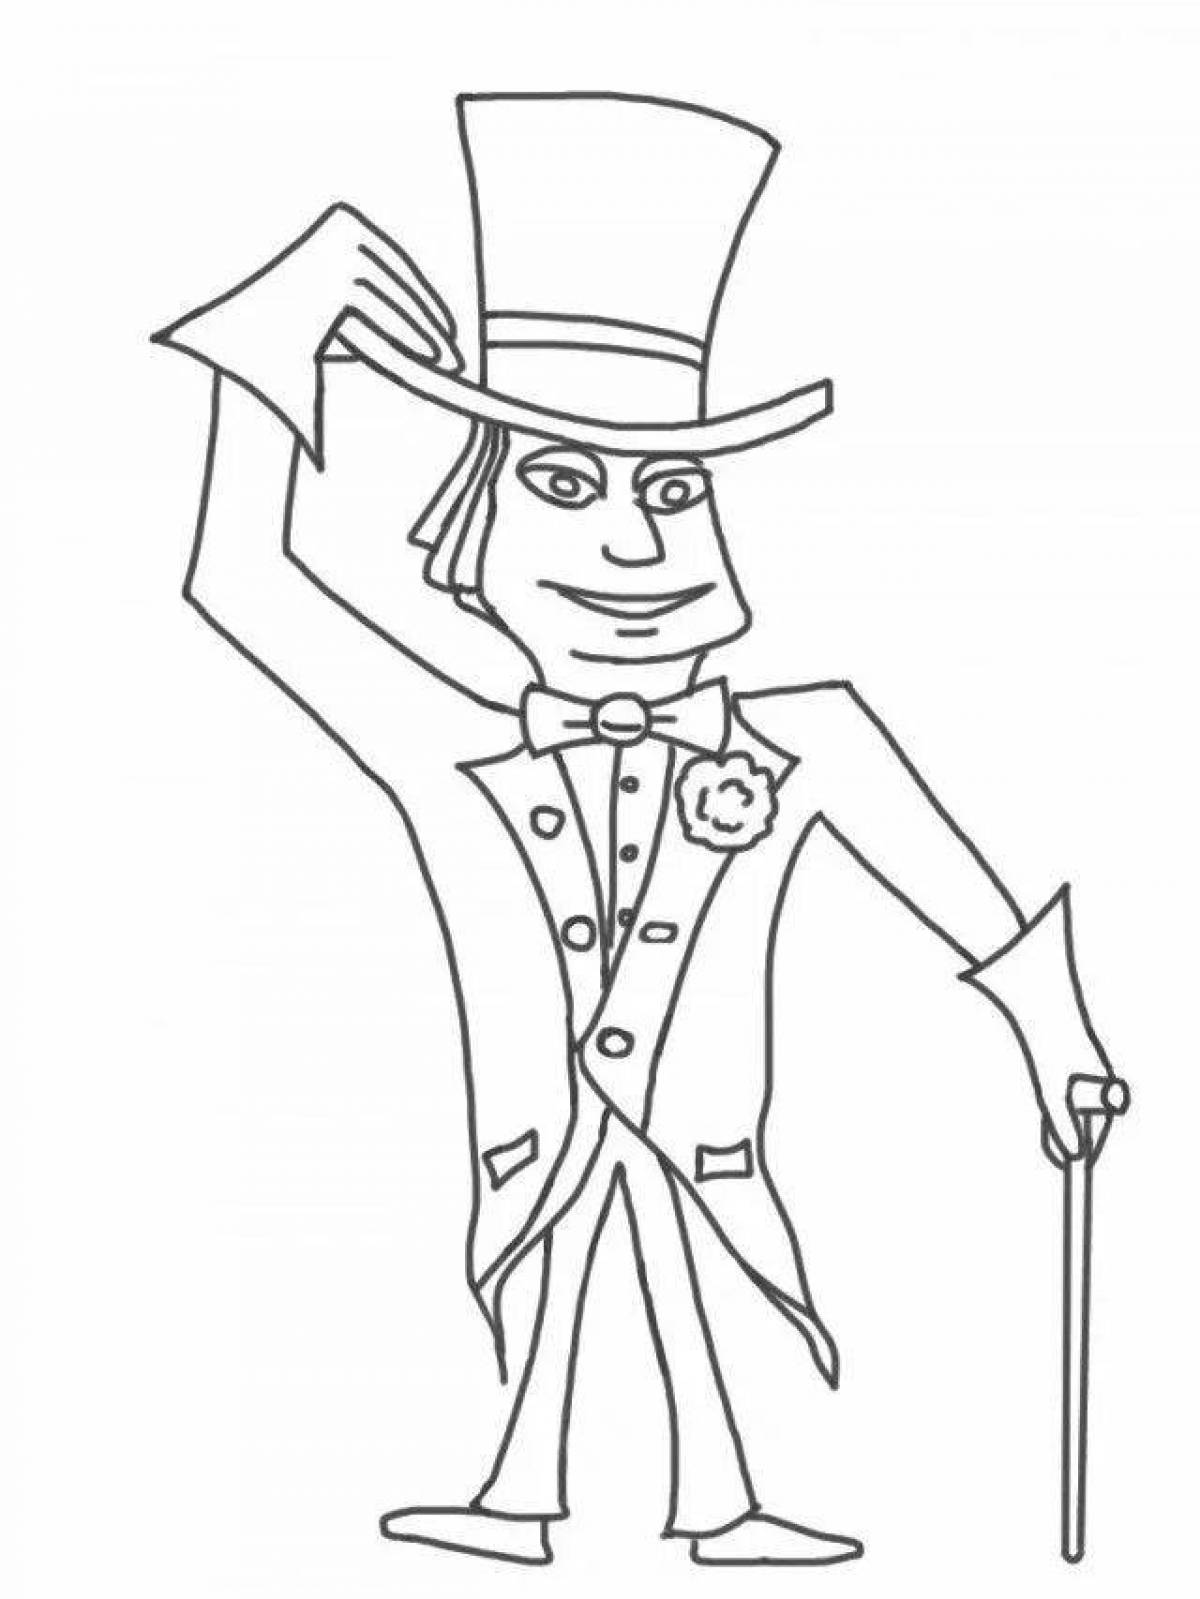 Fabulous Willy Wonka coloring book